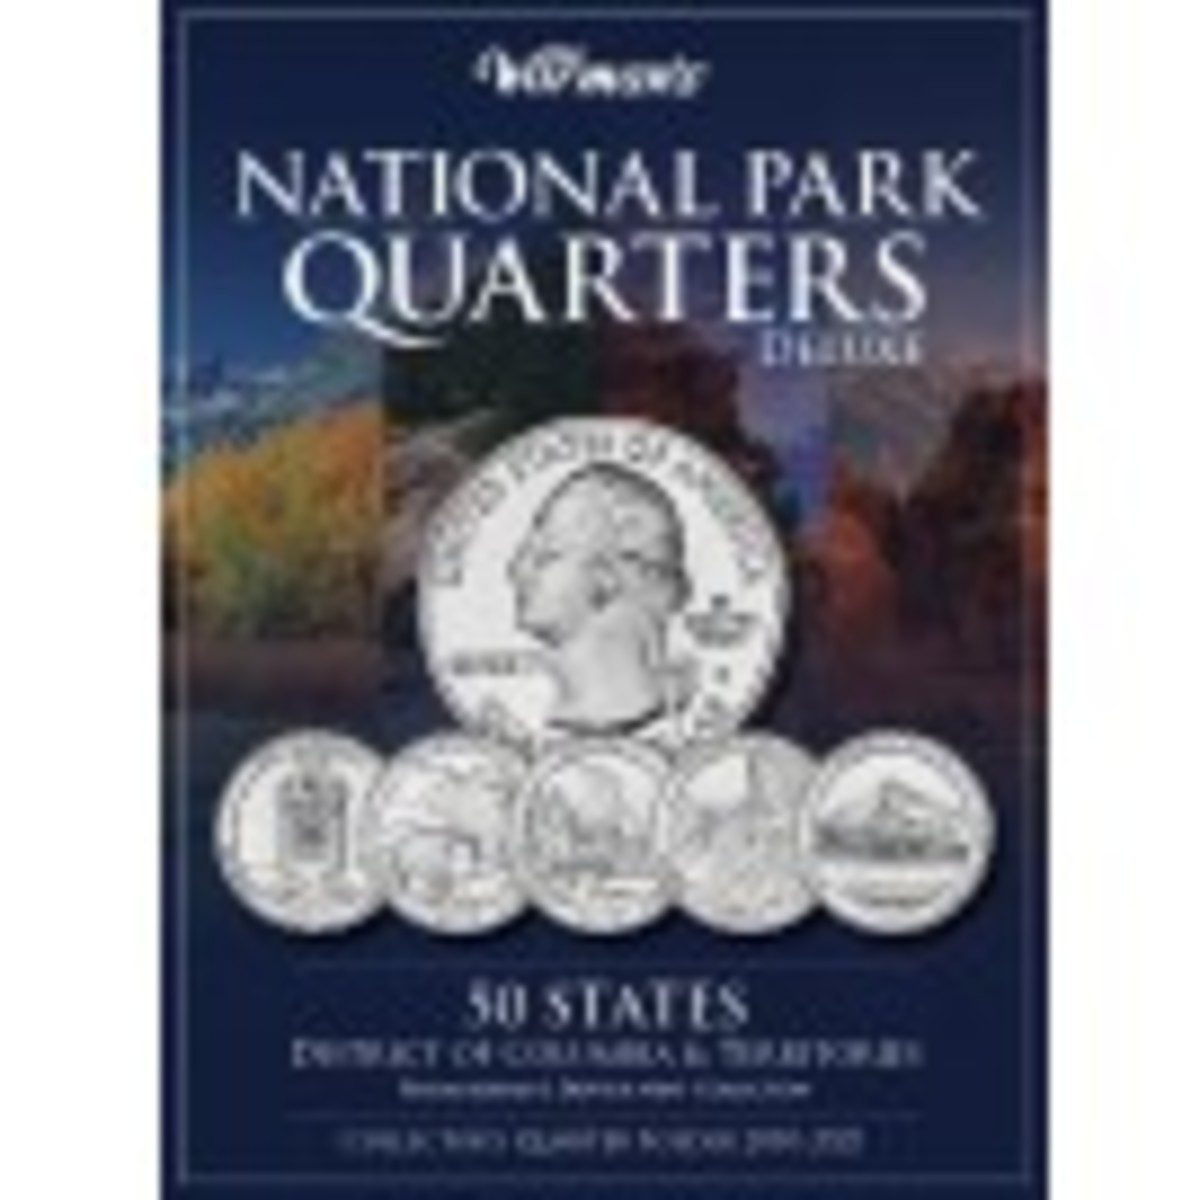 National Park Quarters Deluxe Collector's Coin Folder